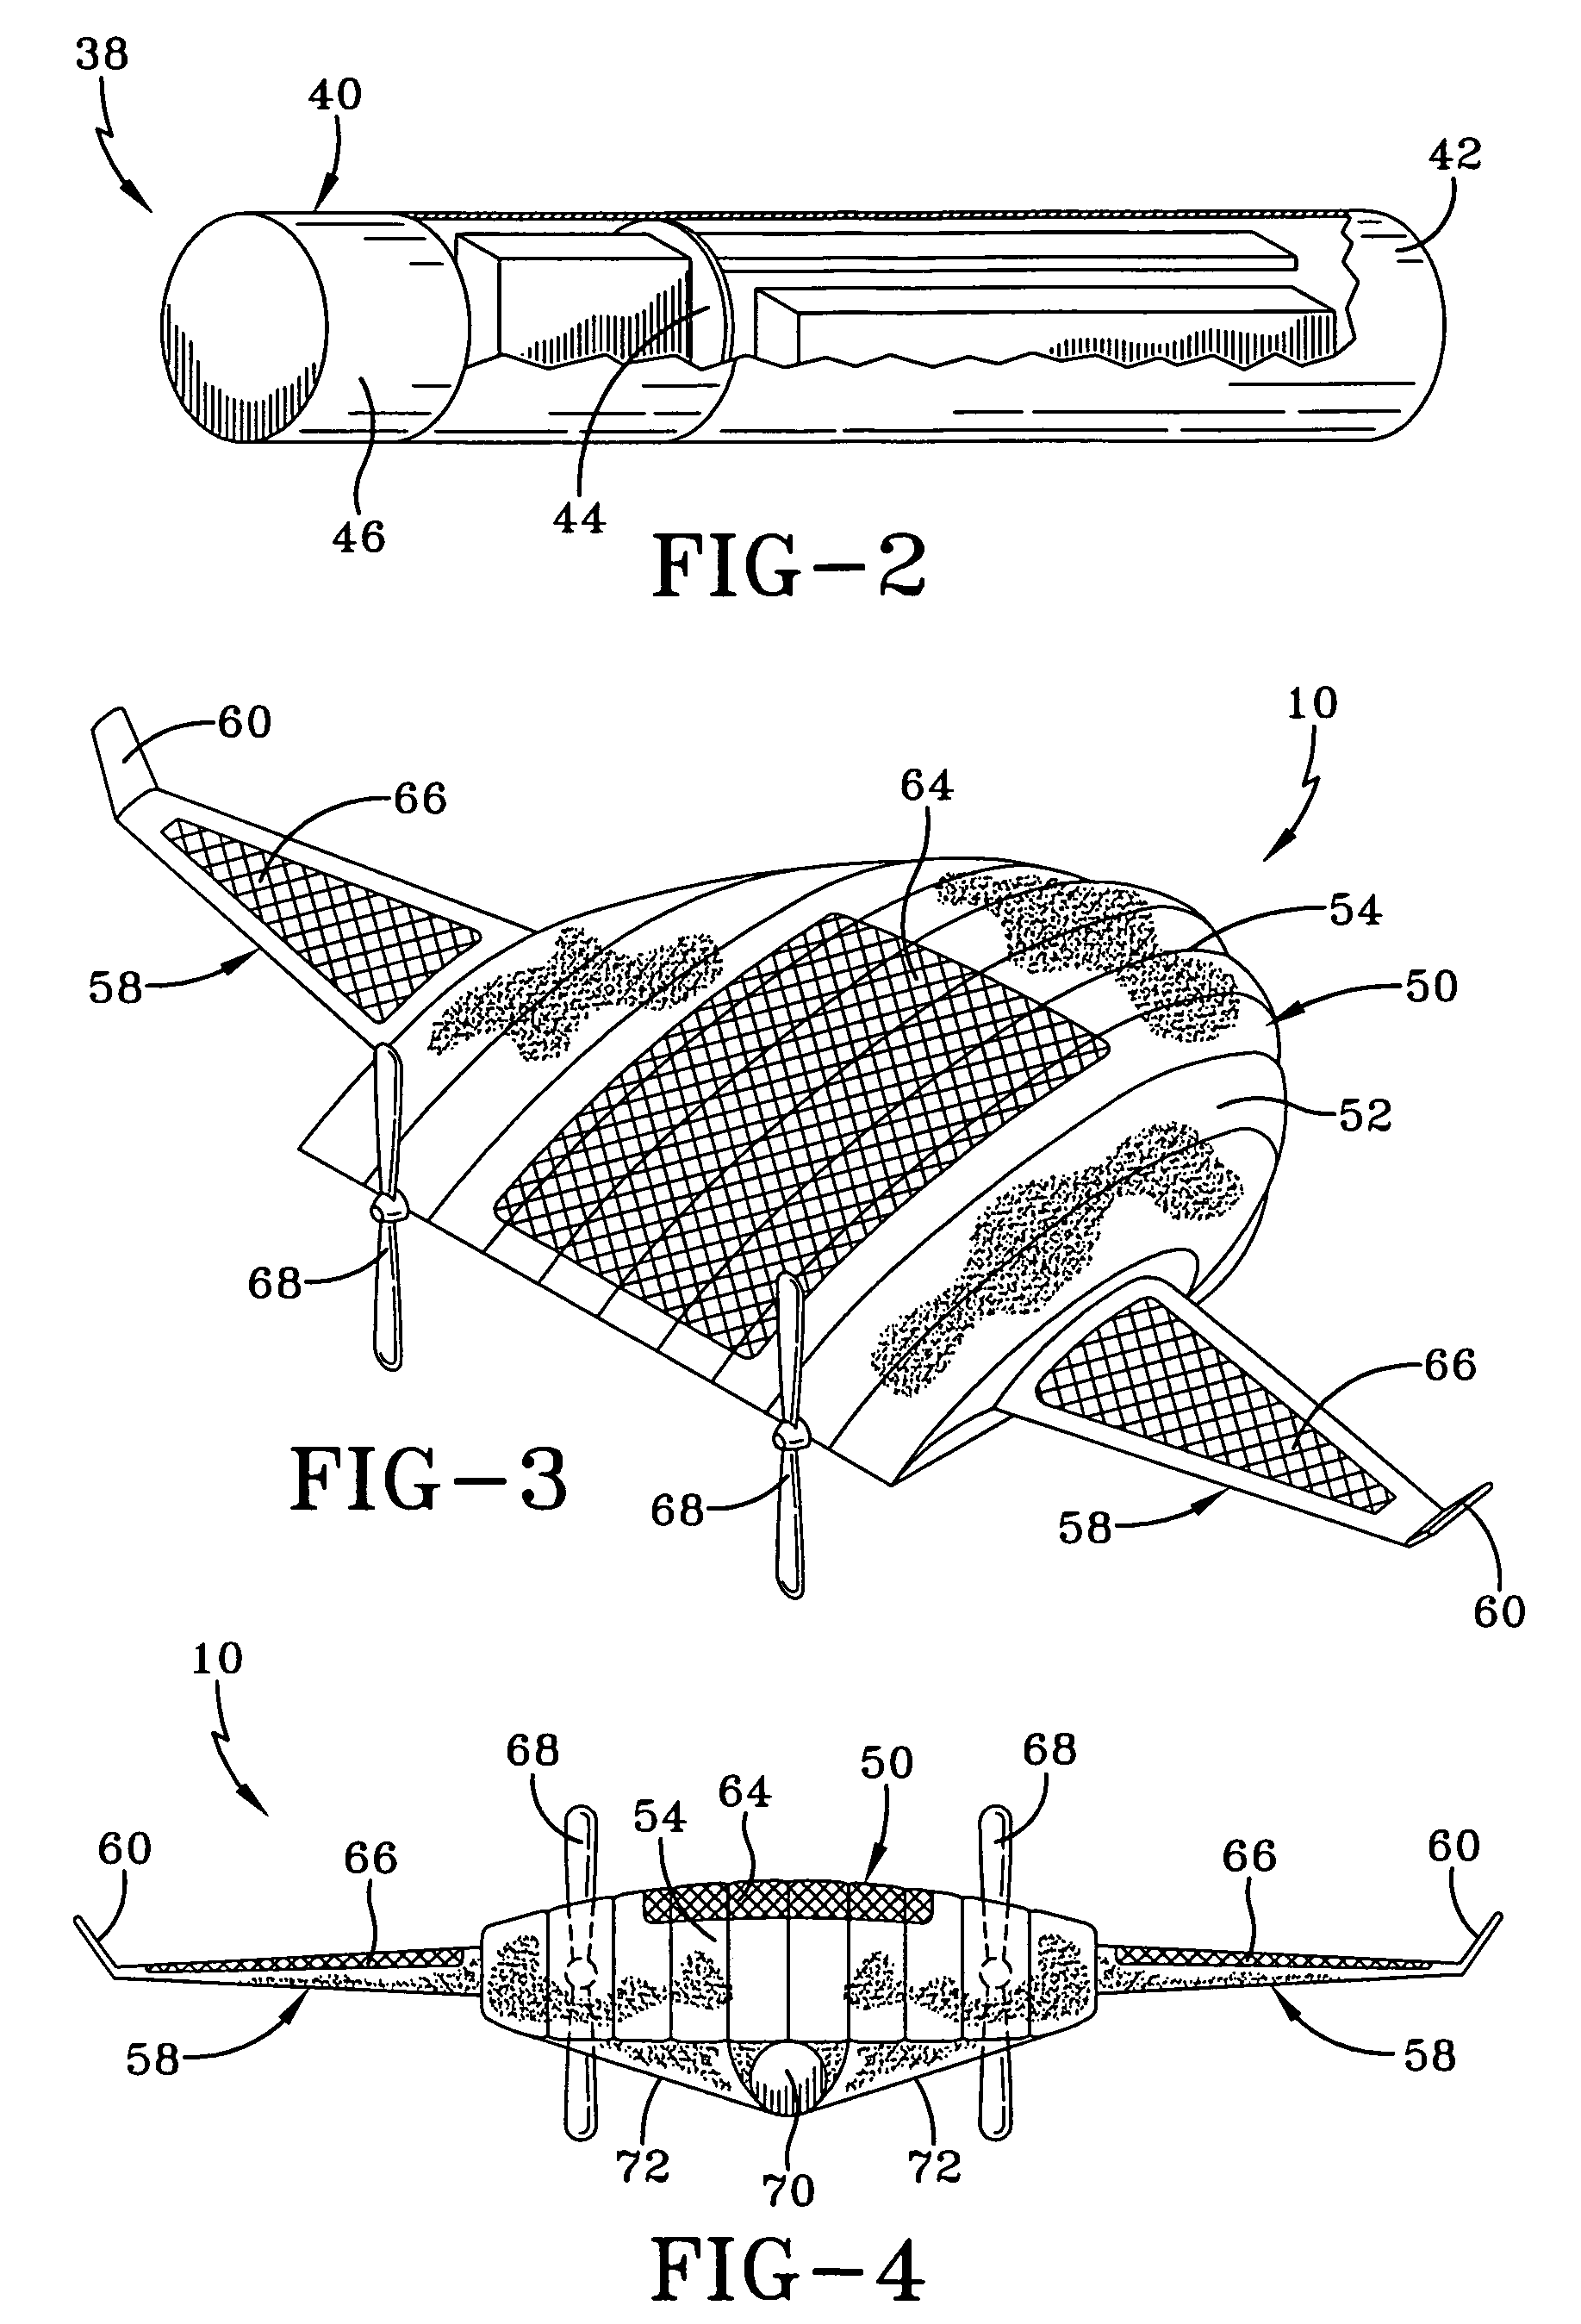 Inflatable endurance unmanned aerial vehicle